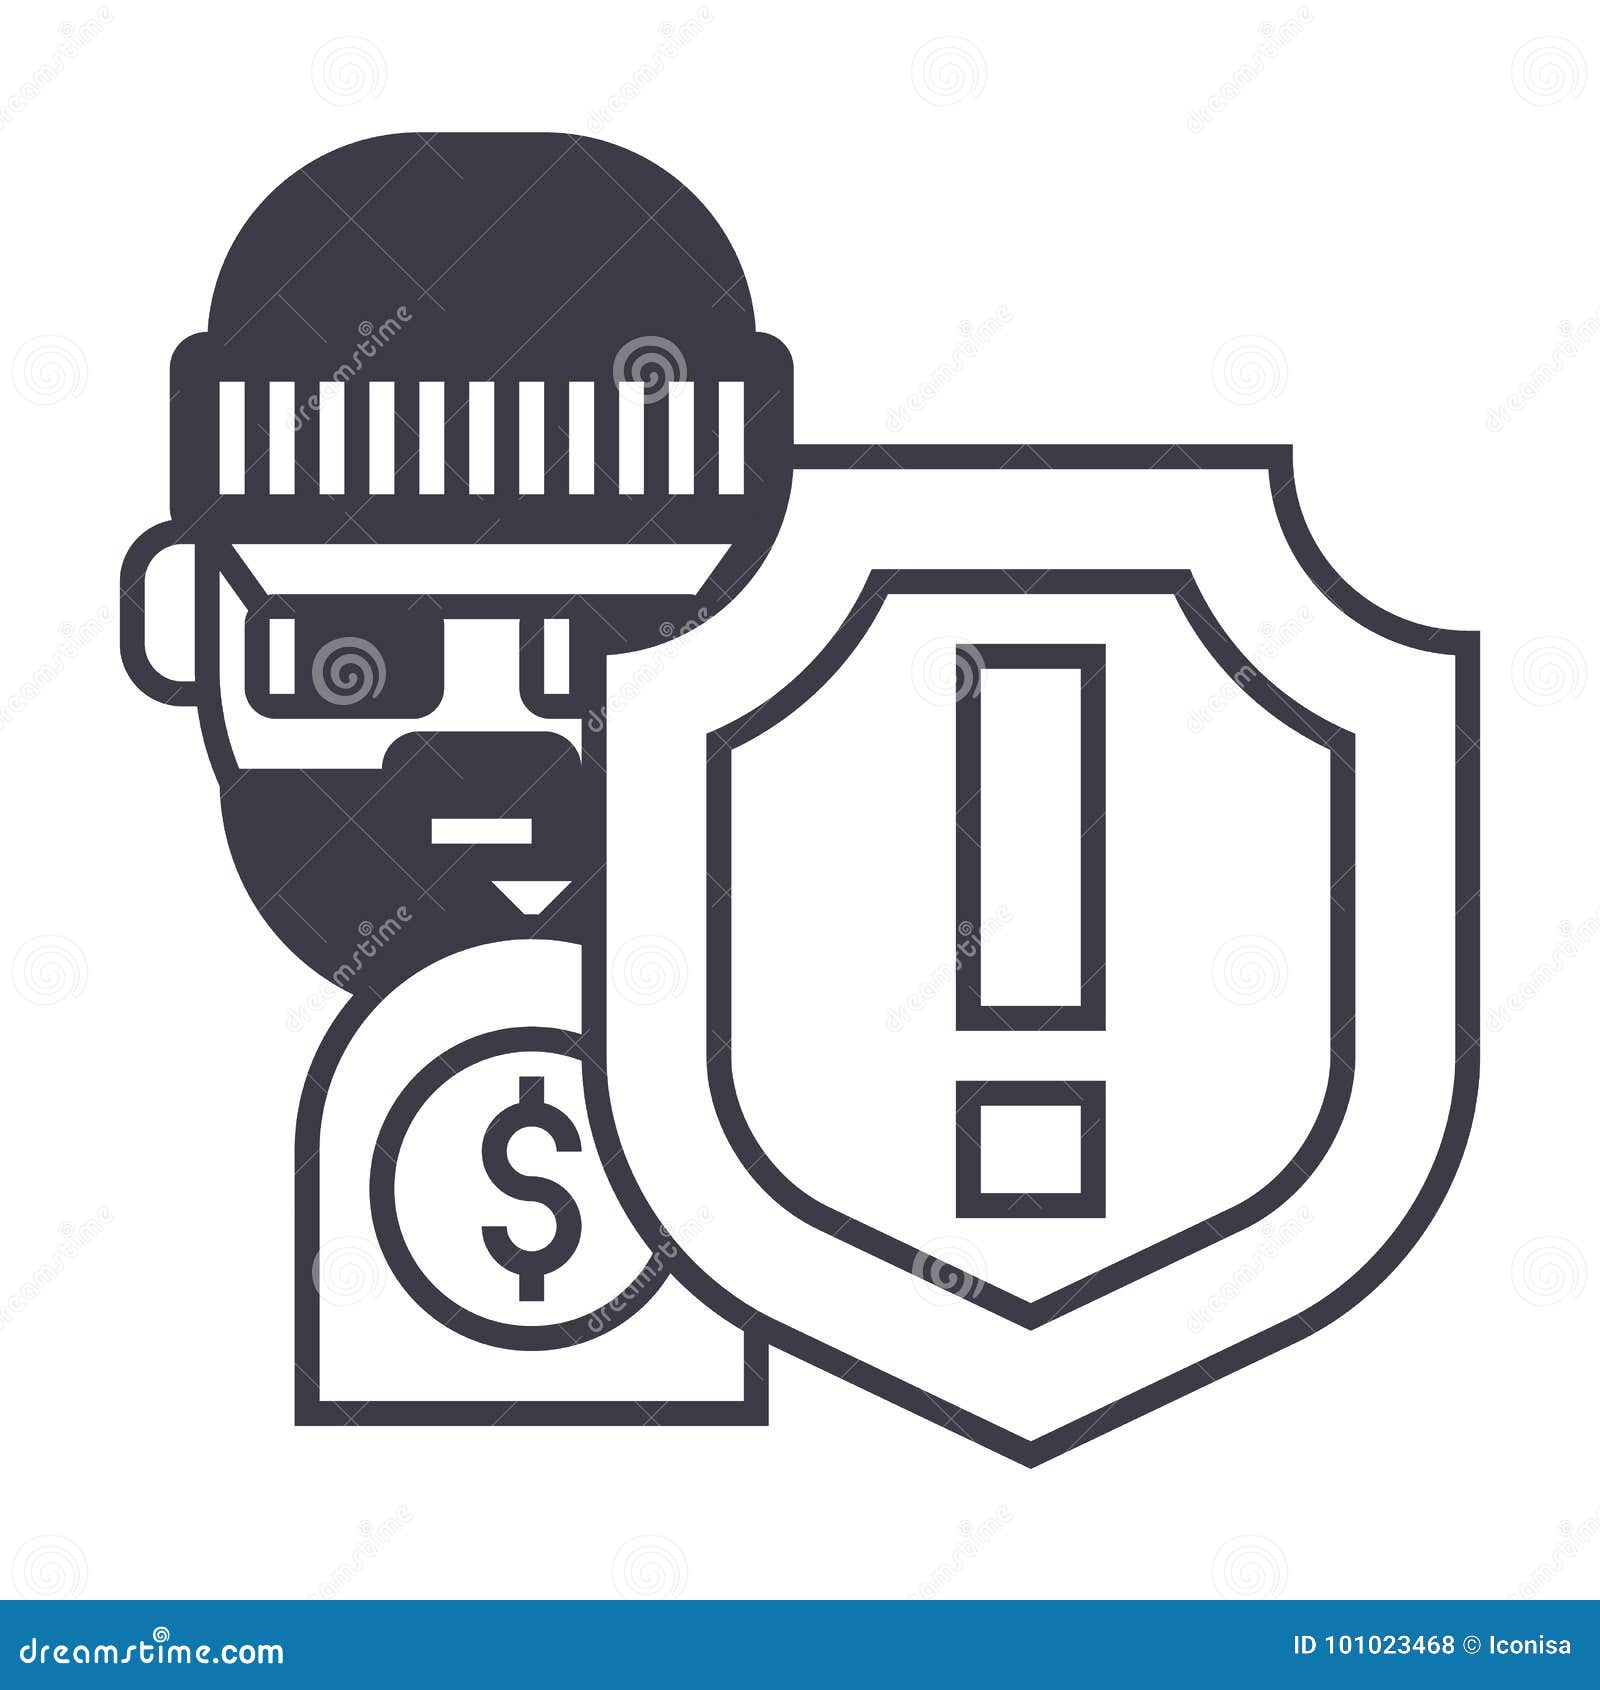 theft thievery steal  line icon, sign,  on background, editable strokes